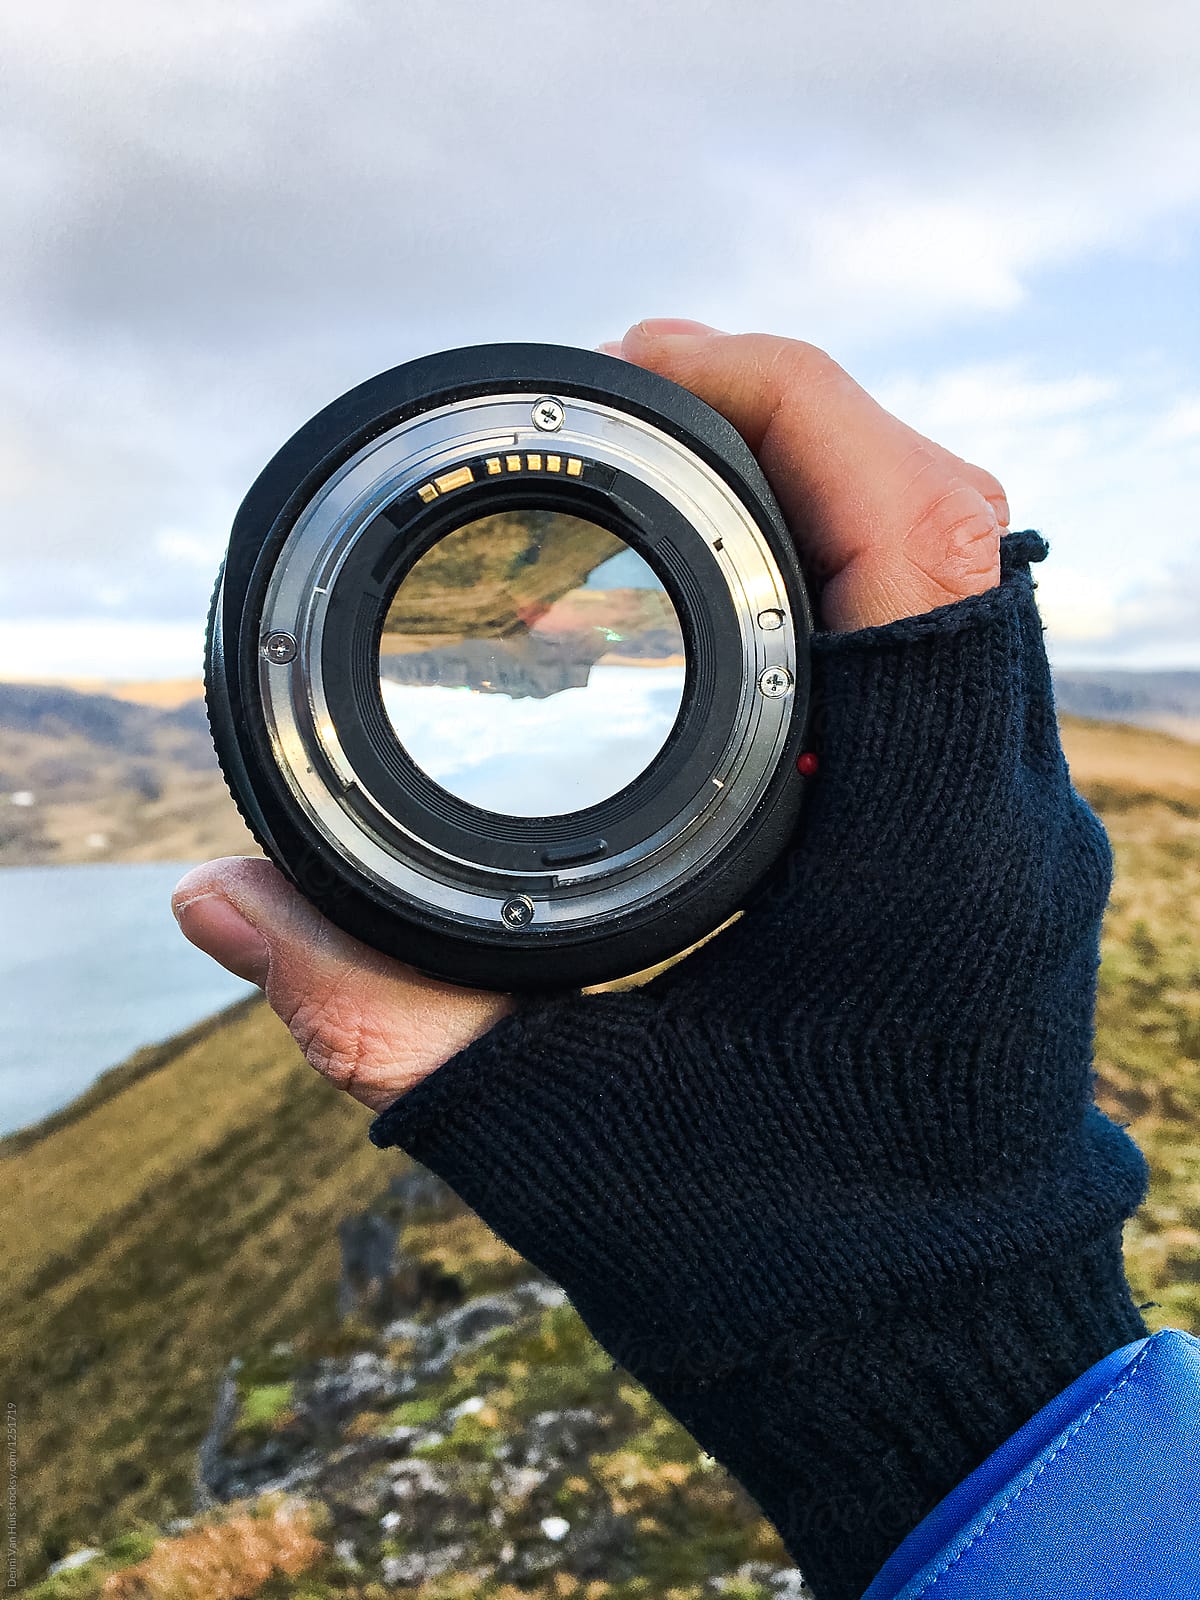 Hand with glove holding up a camera lens and looks through it surrounded by a beautiful landscape